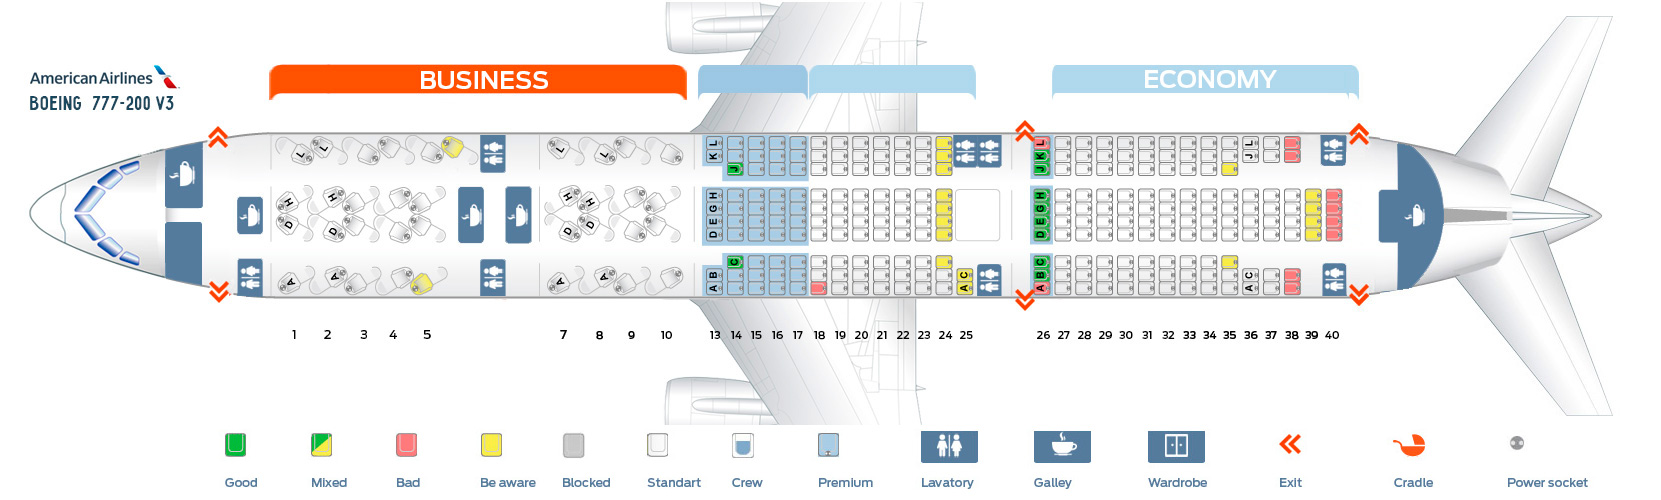 American Airlines Seat Map Boeing 777-200 V3